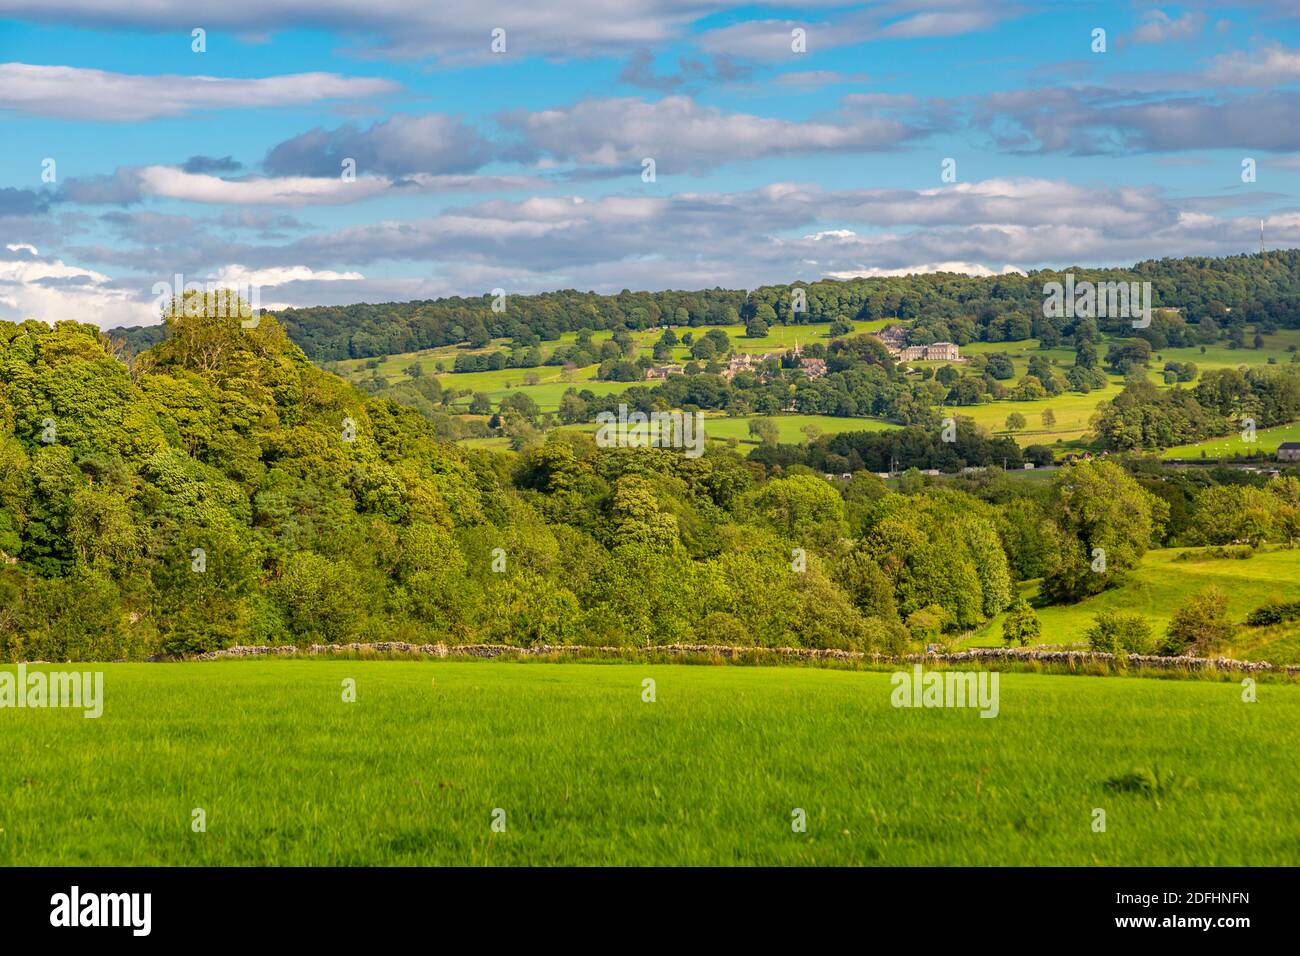 View of Stanton in the Peak village and countryside near Youlgrave, Peak District National Park, Derbyshire, England, United Kingdom, Europe Stock Photo